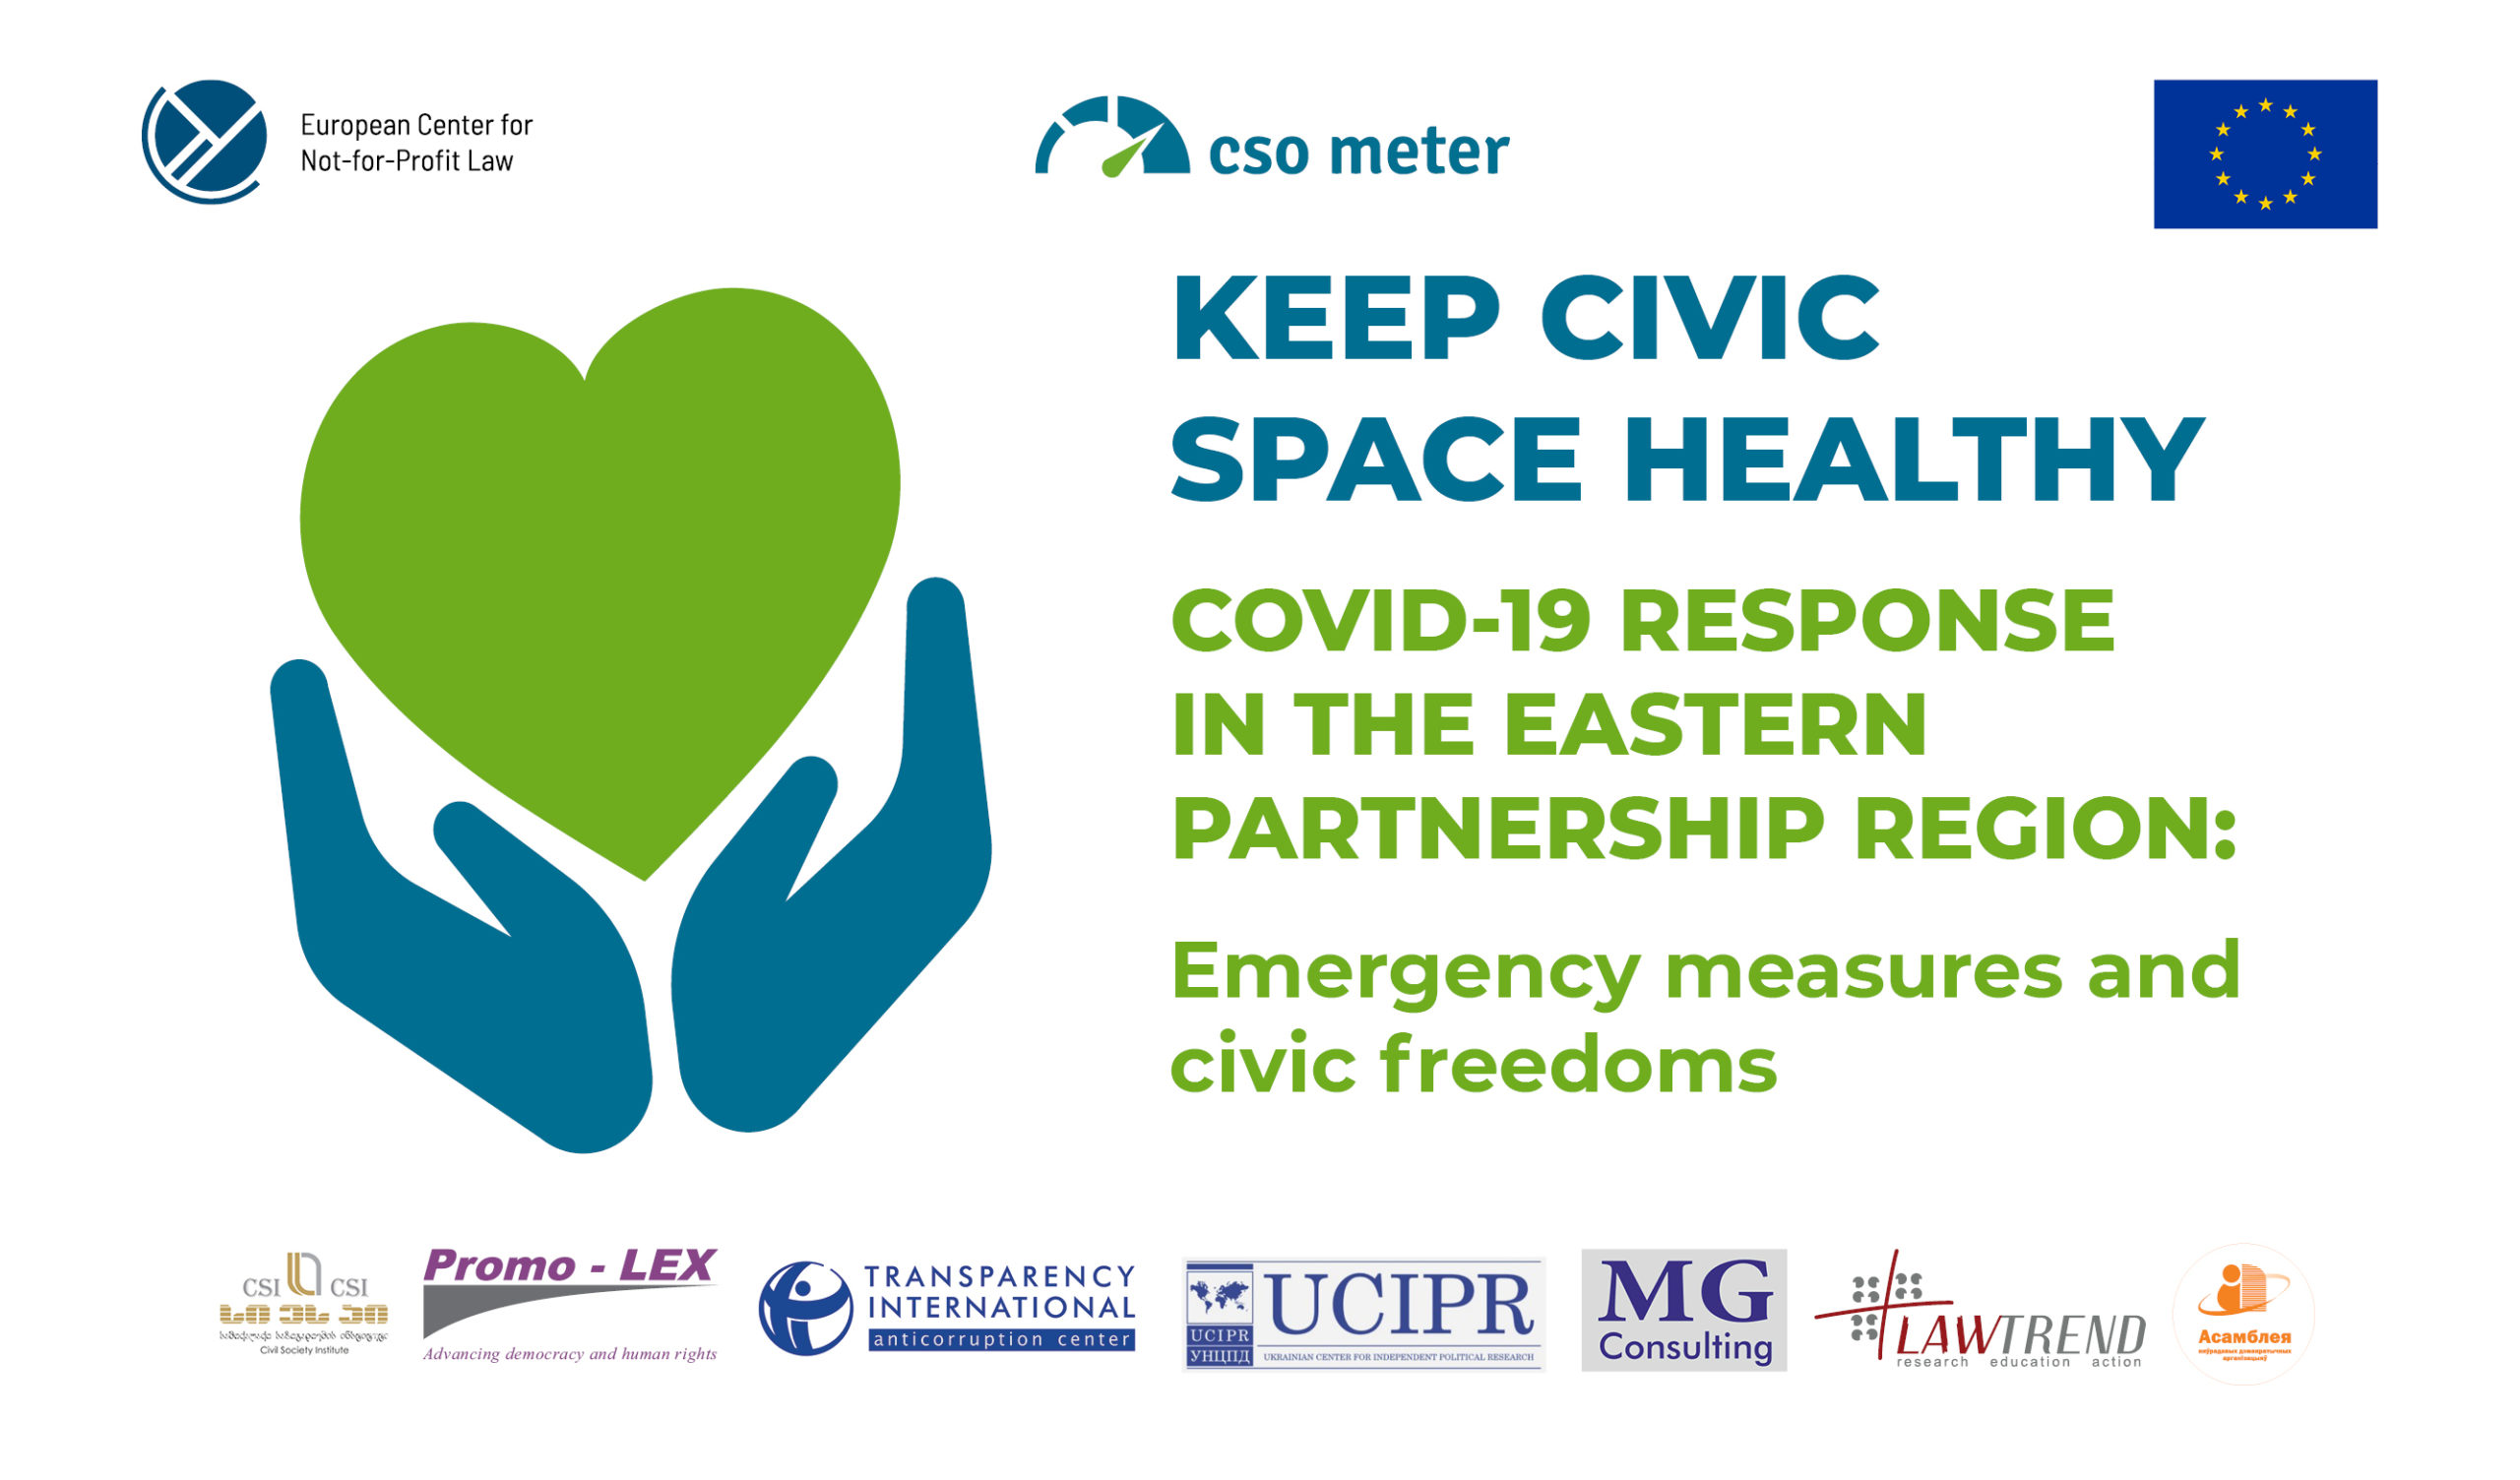 COVID-19 response in the Eastern Partnership region: emergency measures and civic freedoms